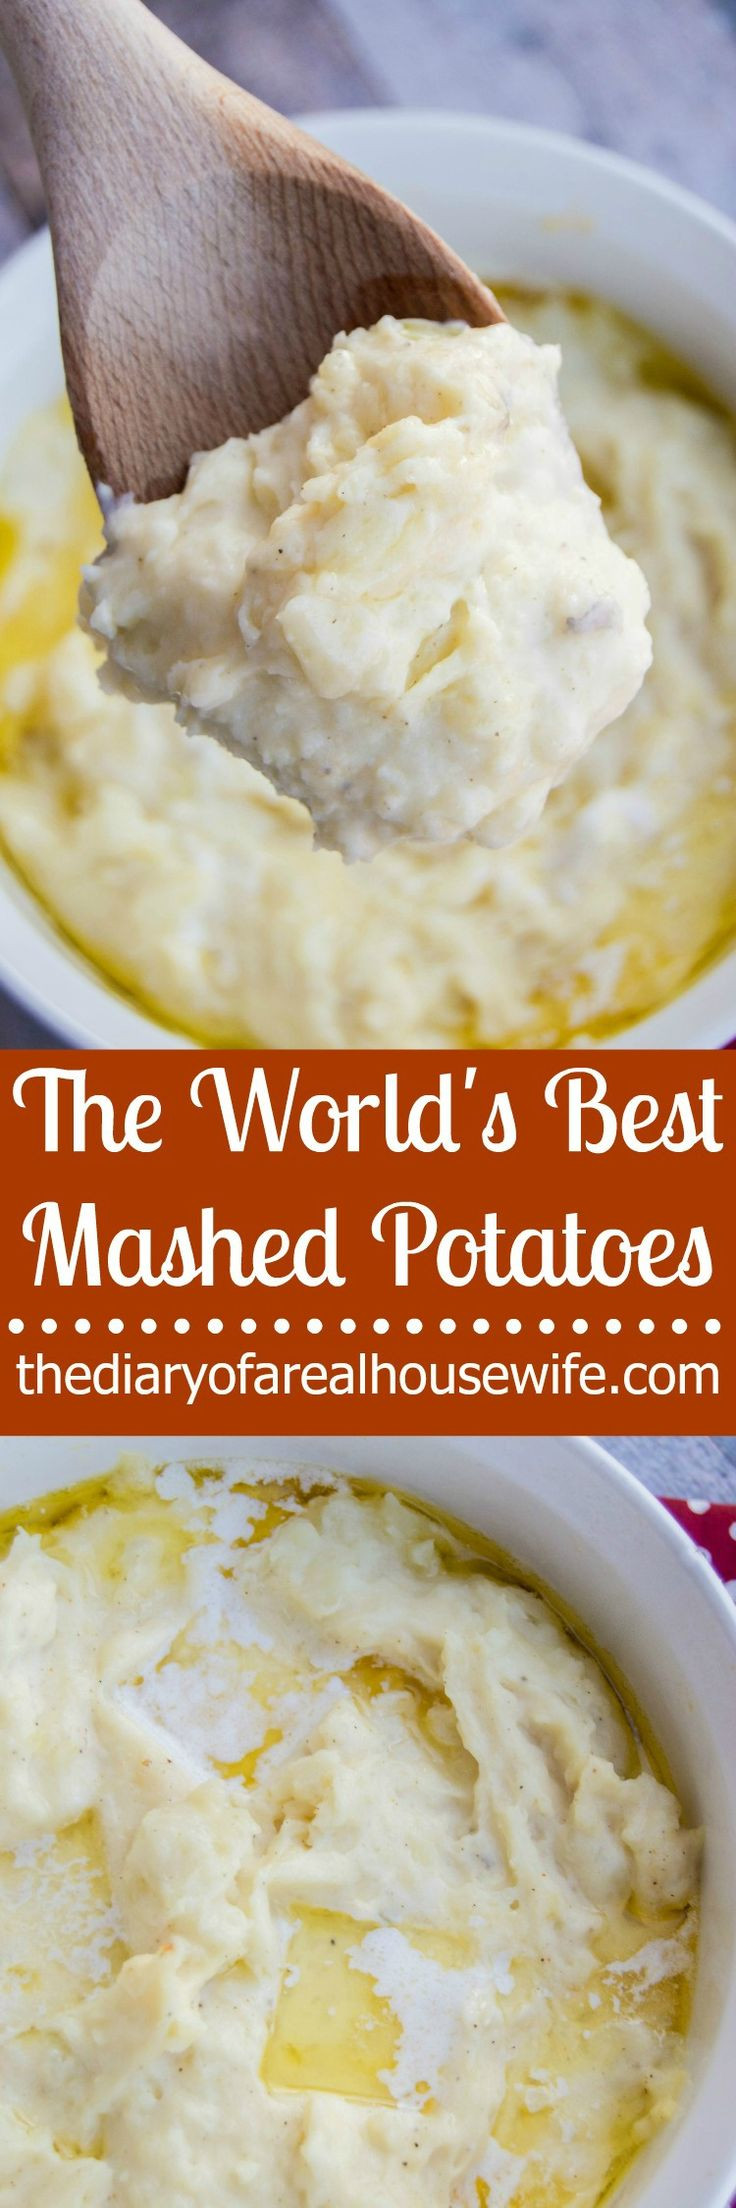 Best Thanksgiving Mashed Potatoes Recipe
 Best 25 Thanksgiving recipes ideas on Pinterest